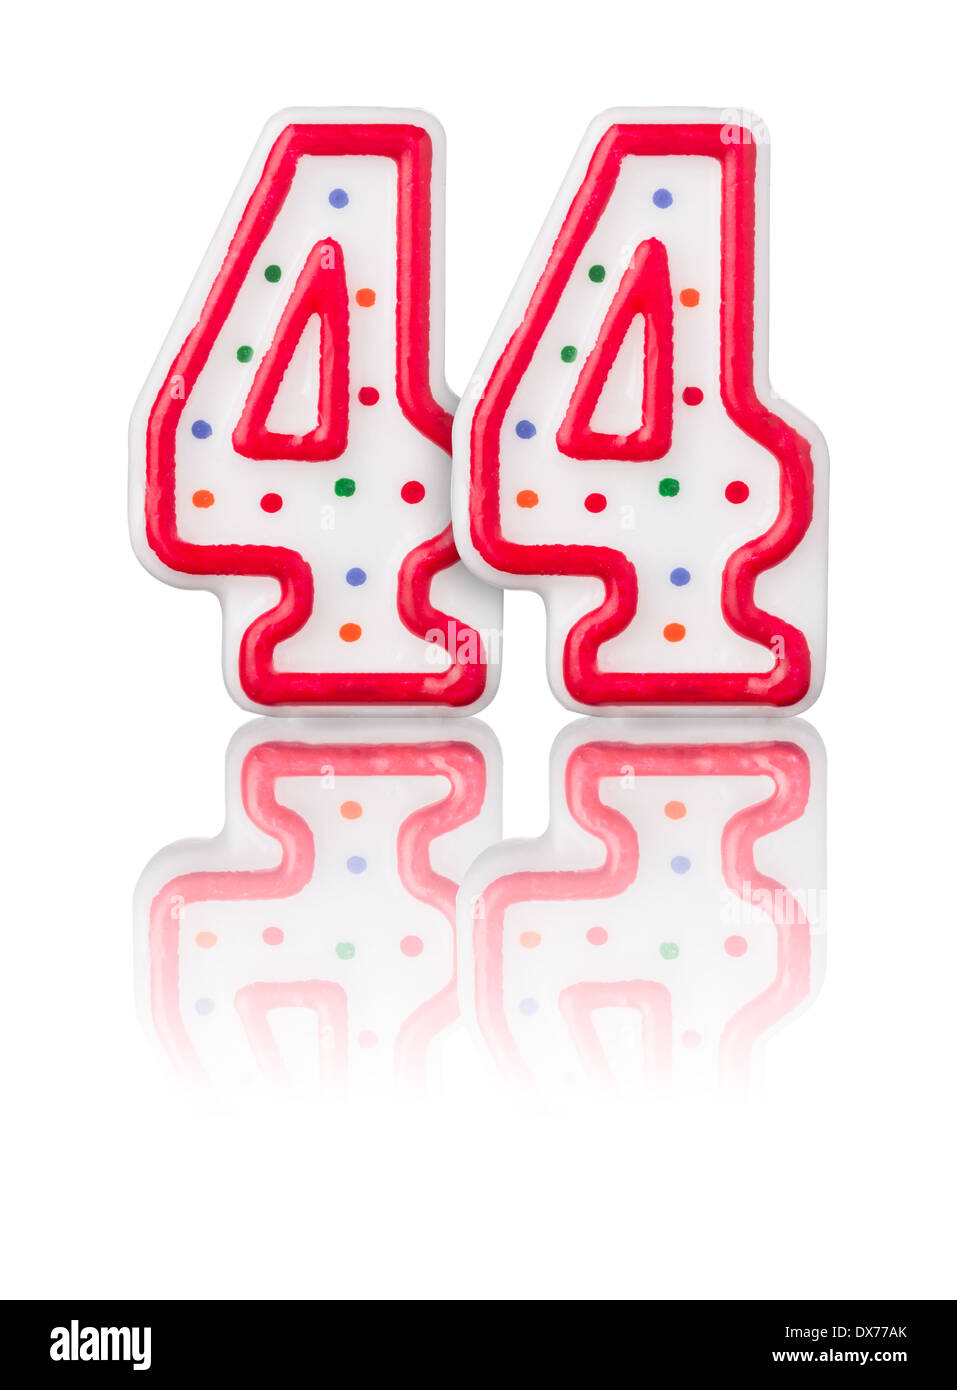 Red number 44 with reflection on a white background Stock Photo - Alamy